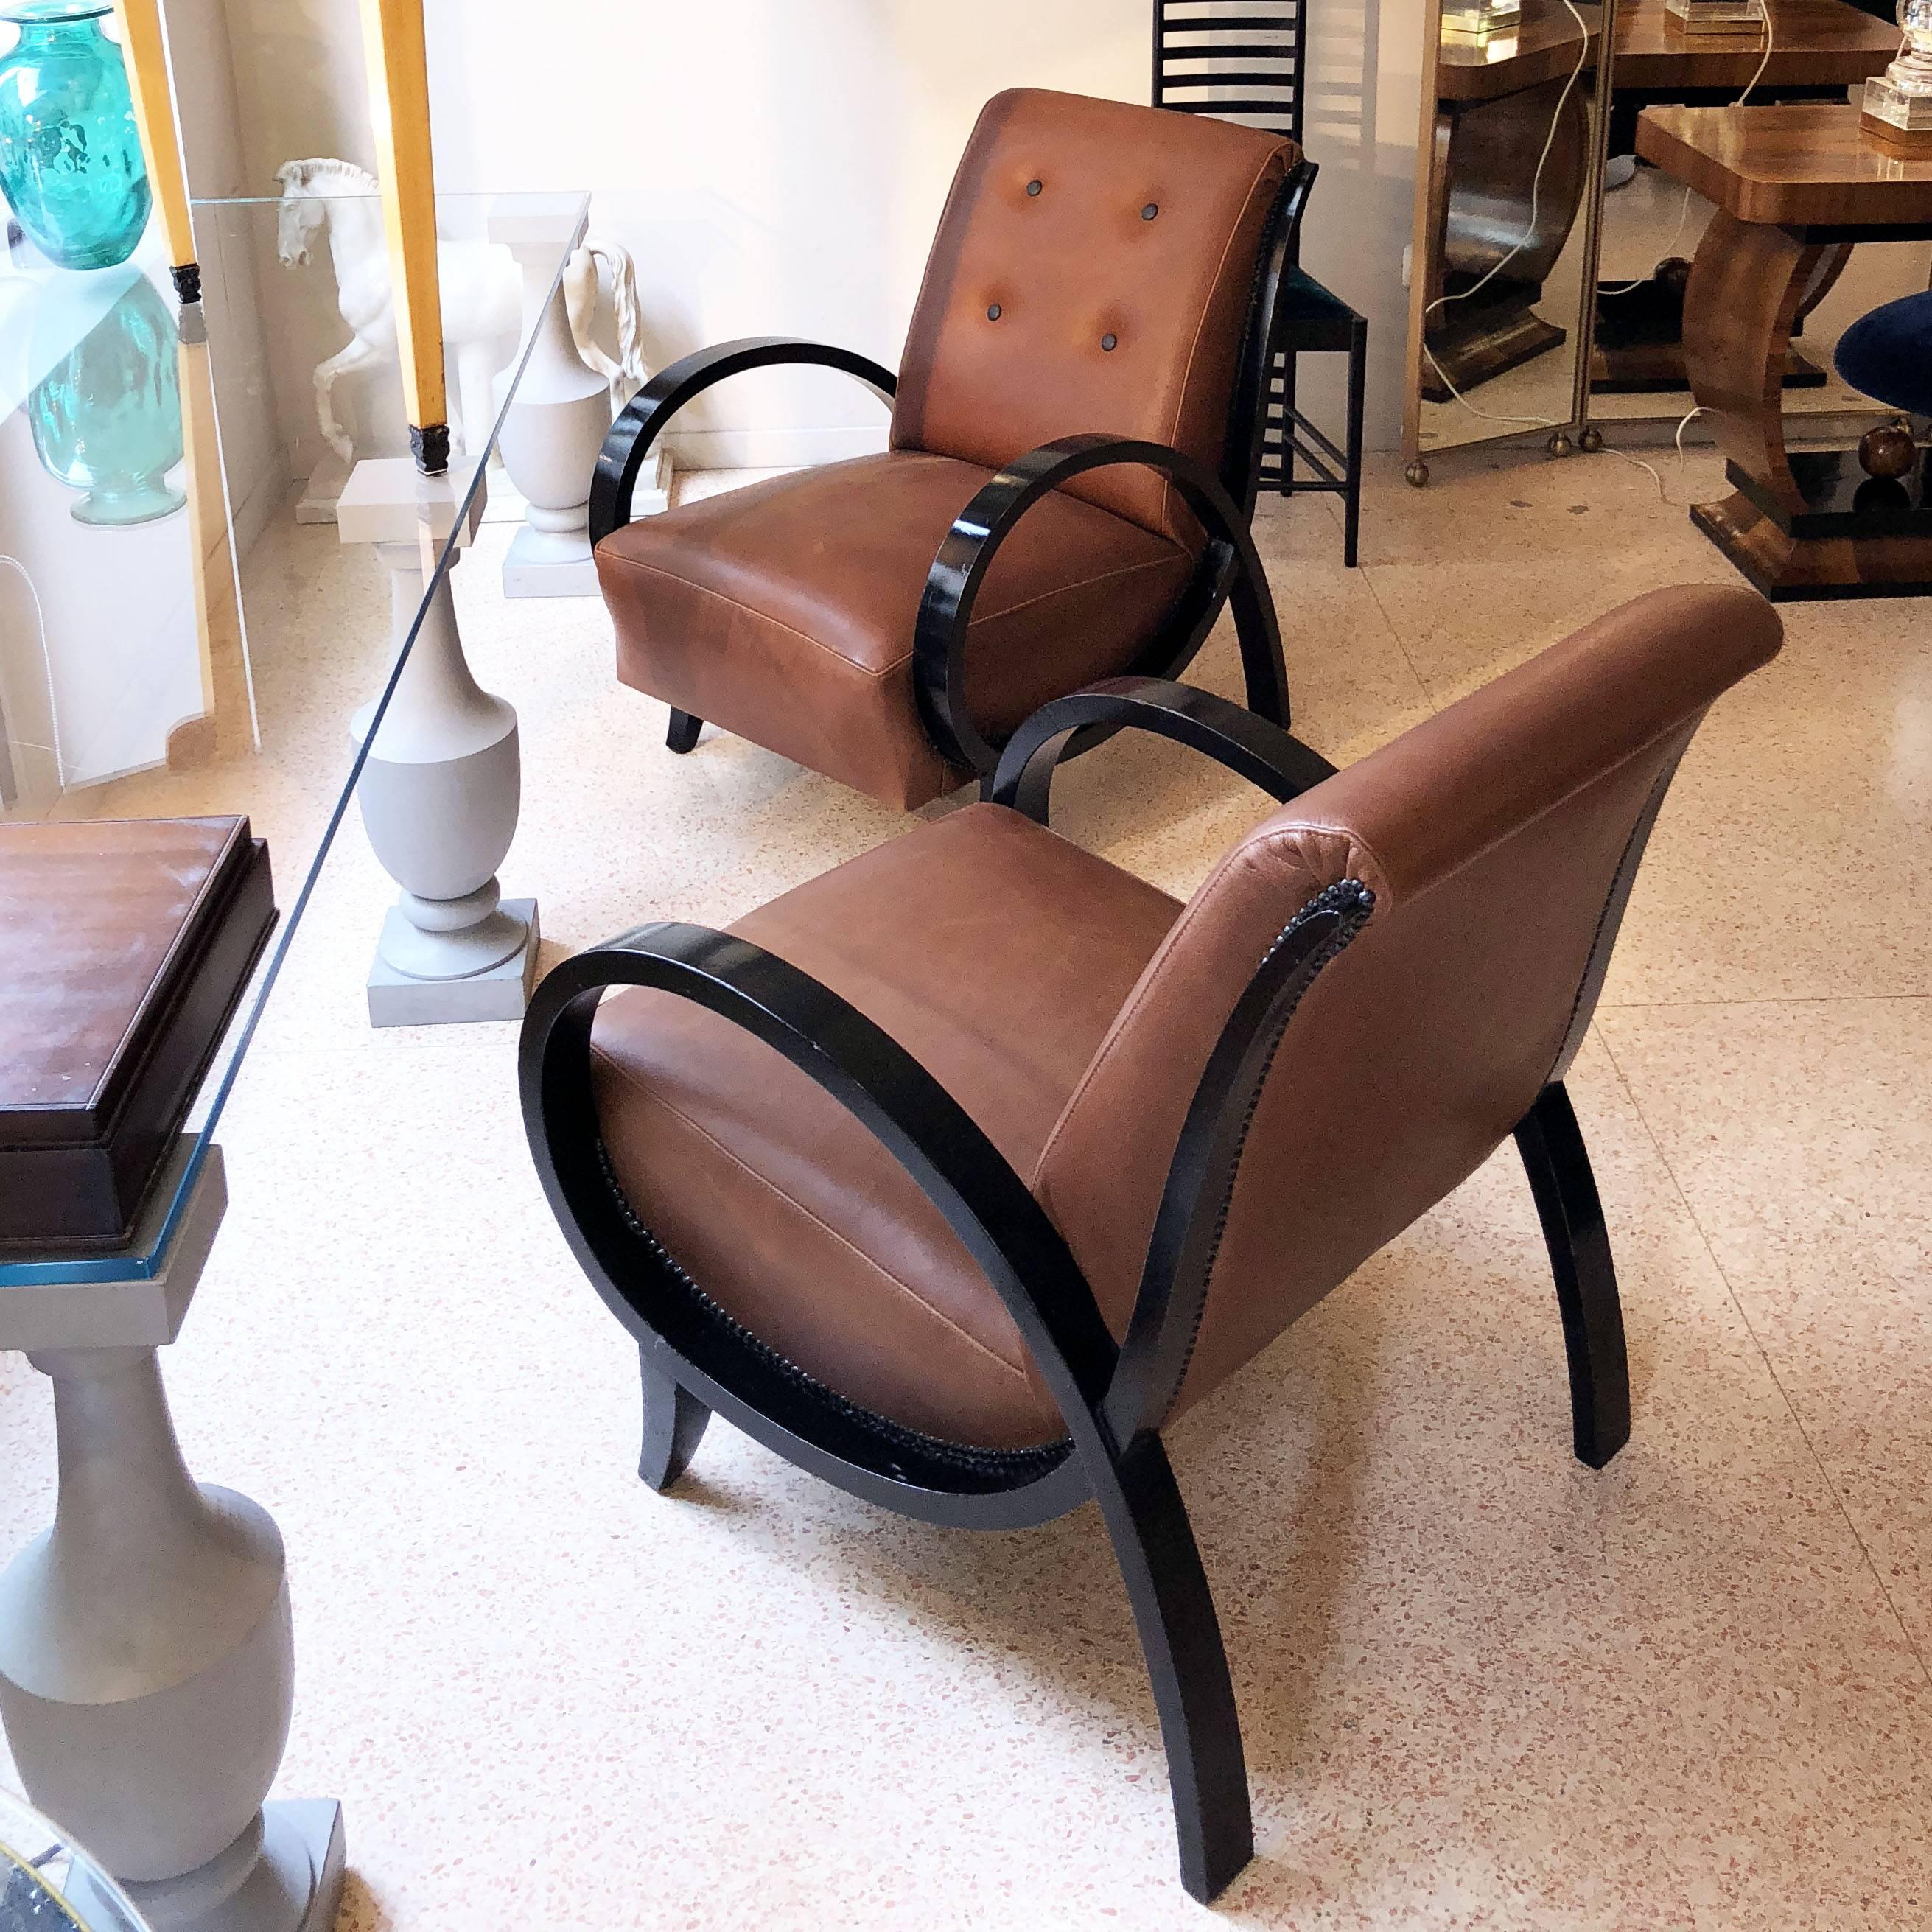 Armchairs from Art Deco period, circa 1930, black ebonized wood armrests and brown leather seats. The armchairs have been reupholstered with premium quality leather and wooden parts have been restored in a conservative way. Size: W 64 cm, D 70 cm, H